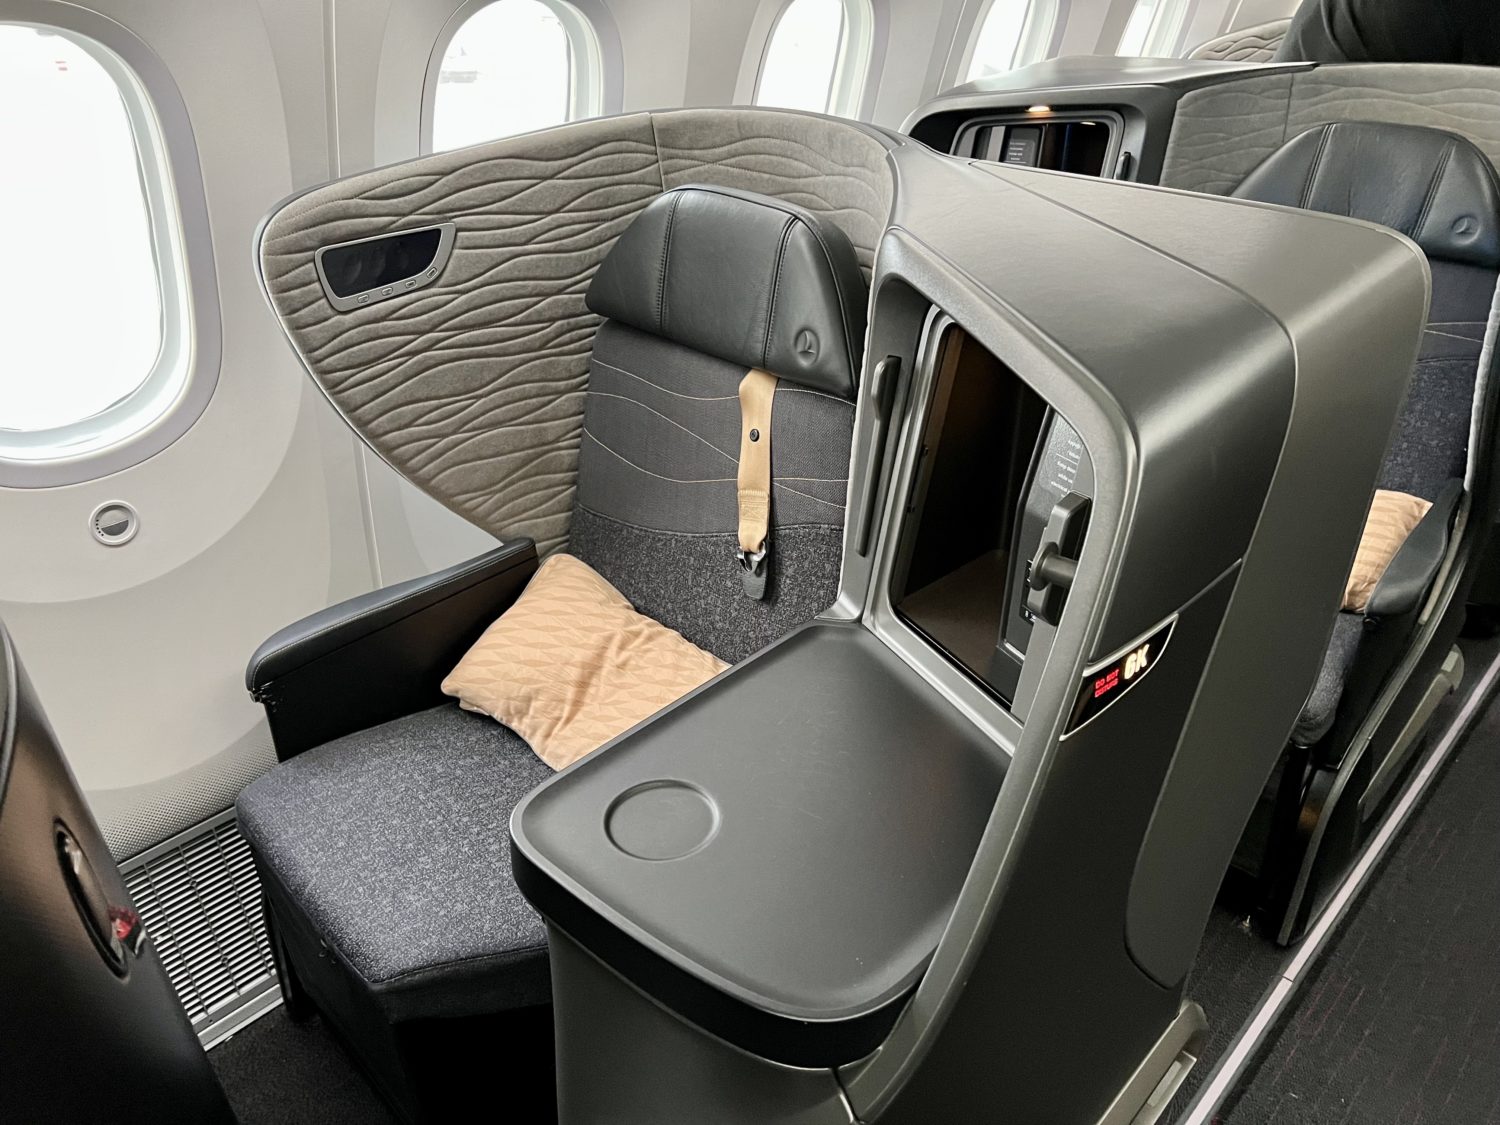 turkish airlines business class seat  Going Beyond the Basics: My New Favorite Points &amp; Miles Programs &#8211; Thrifty Traveler turkish airlines business class seat 6k scaled